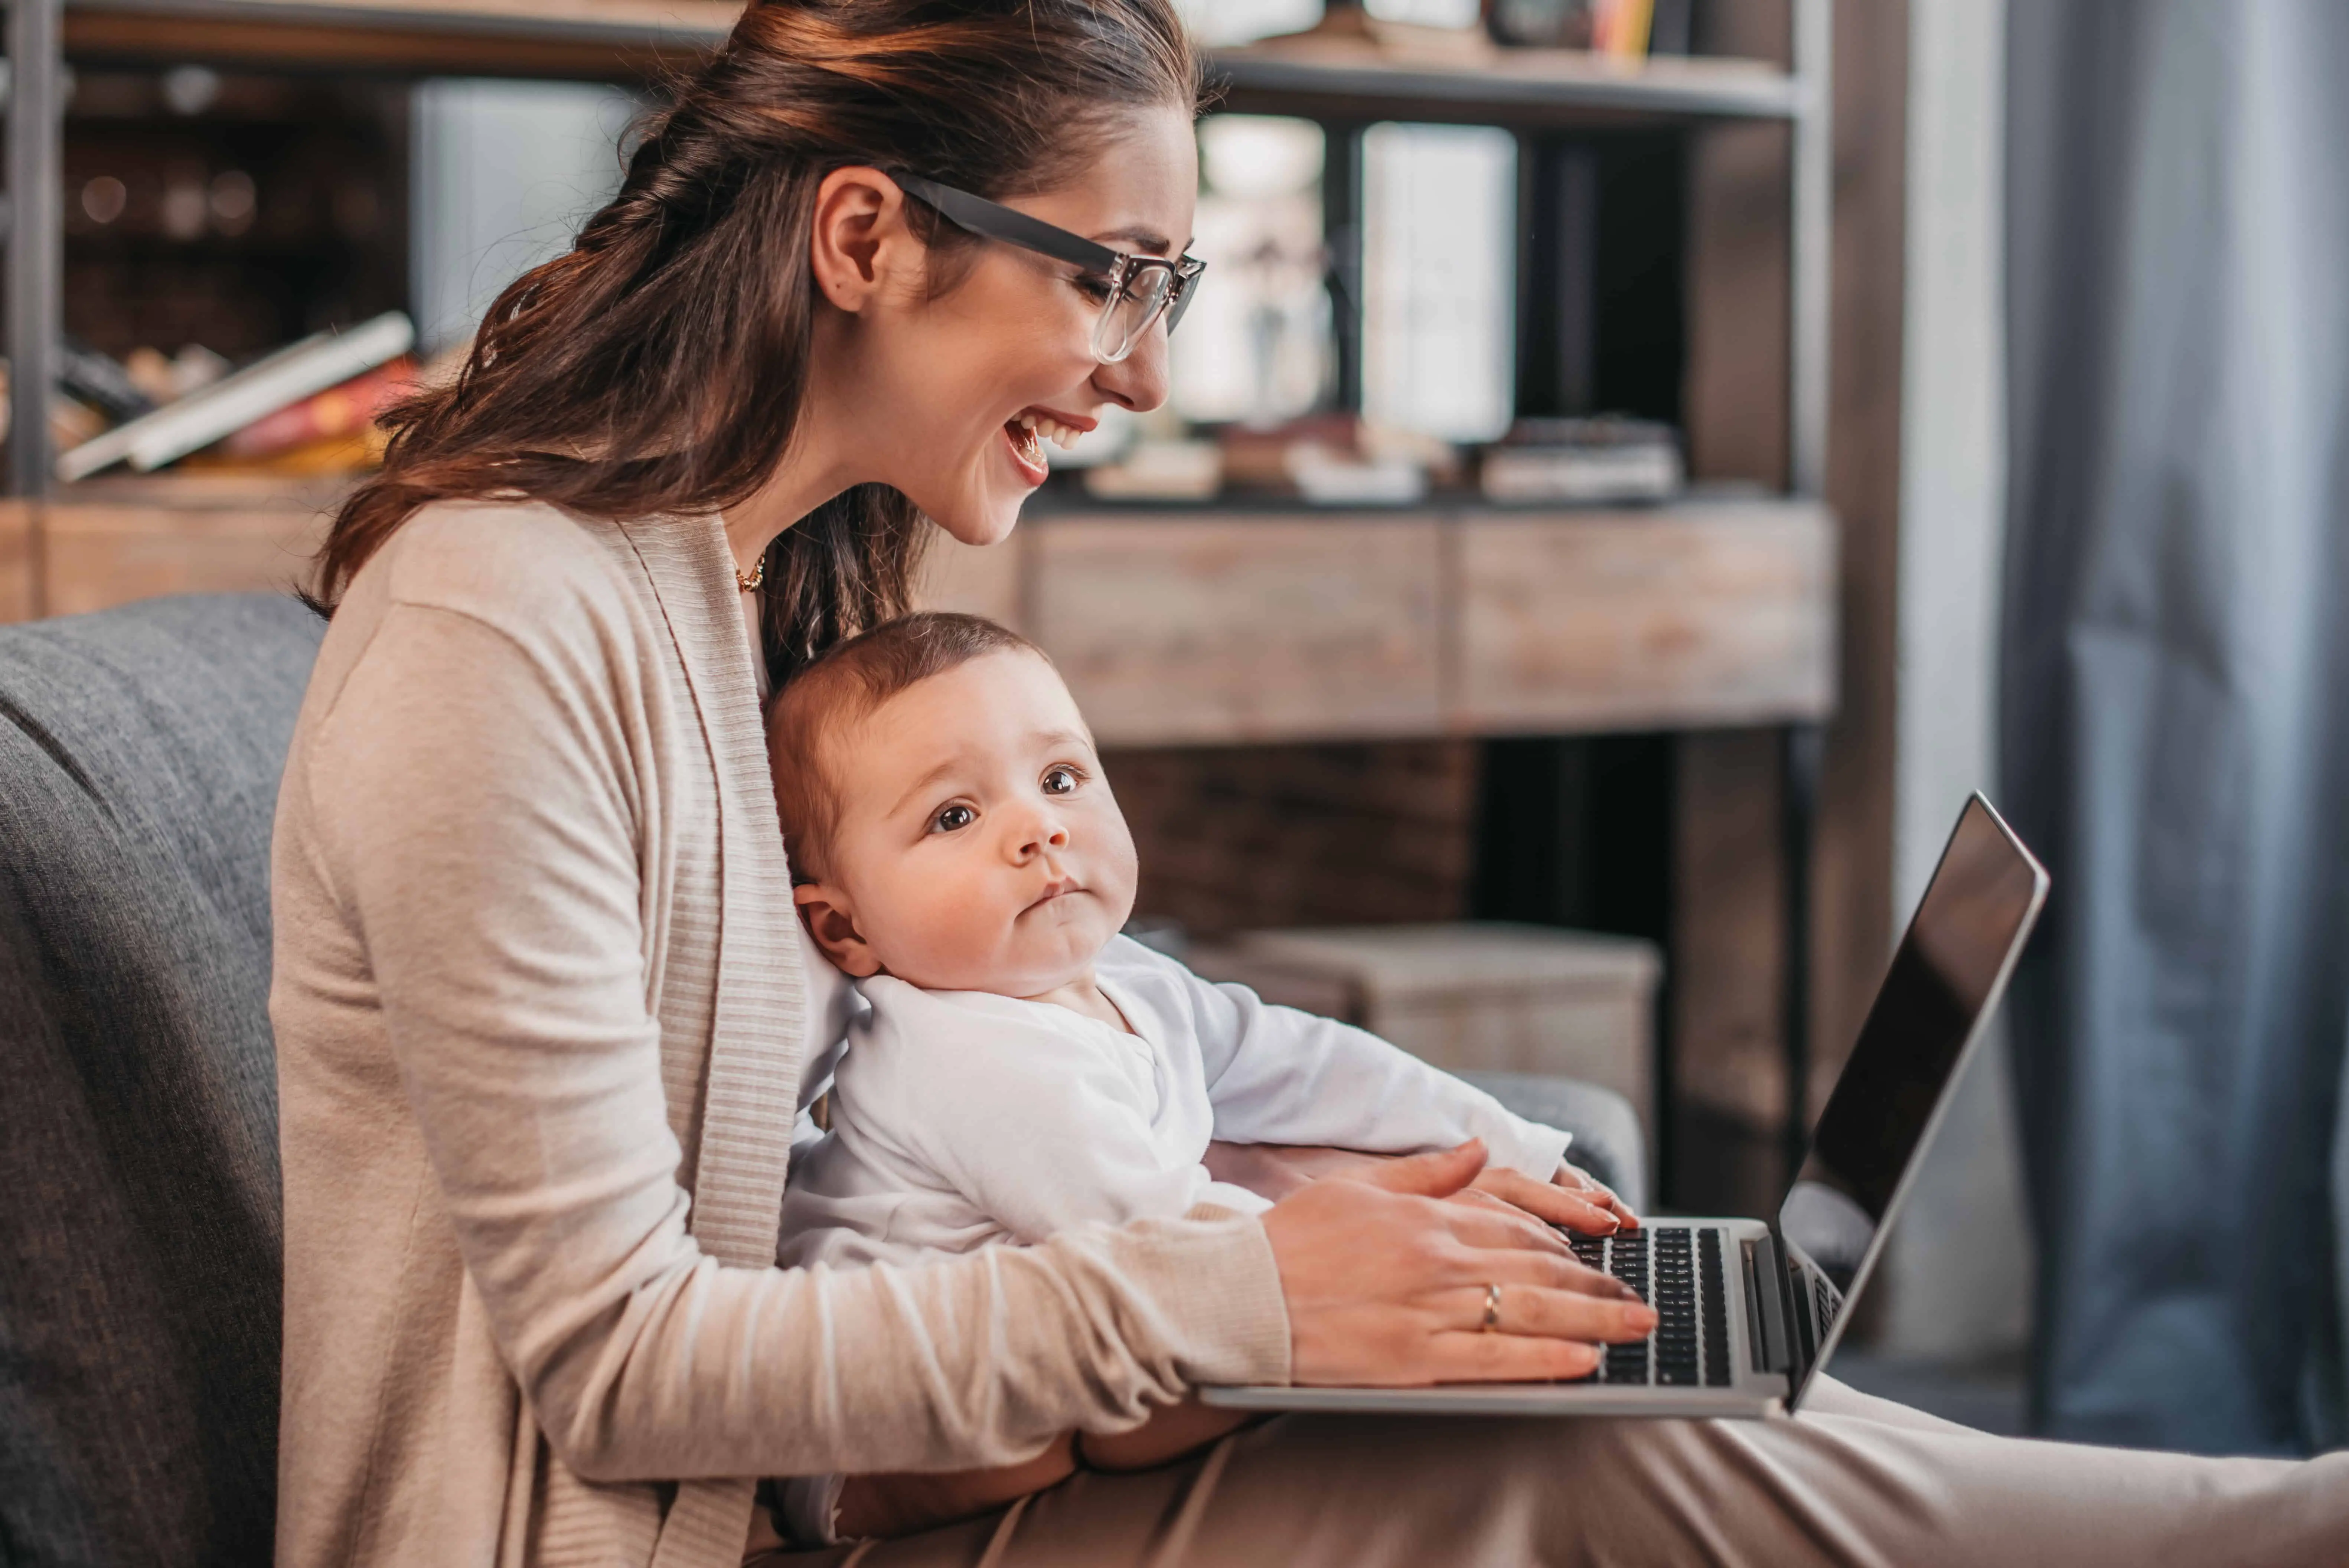 work from home jobs for mums - a woman working from home at a laptop holding a baby